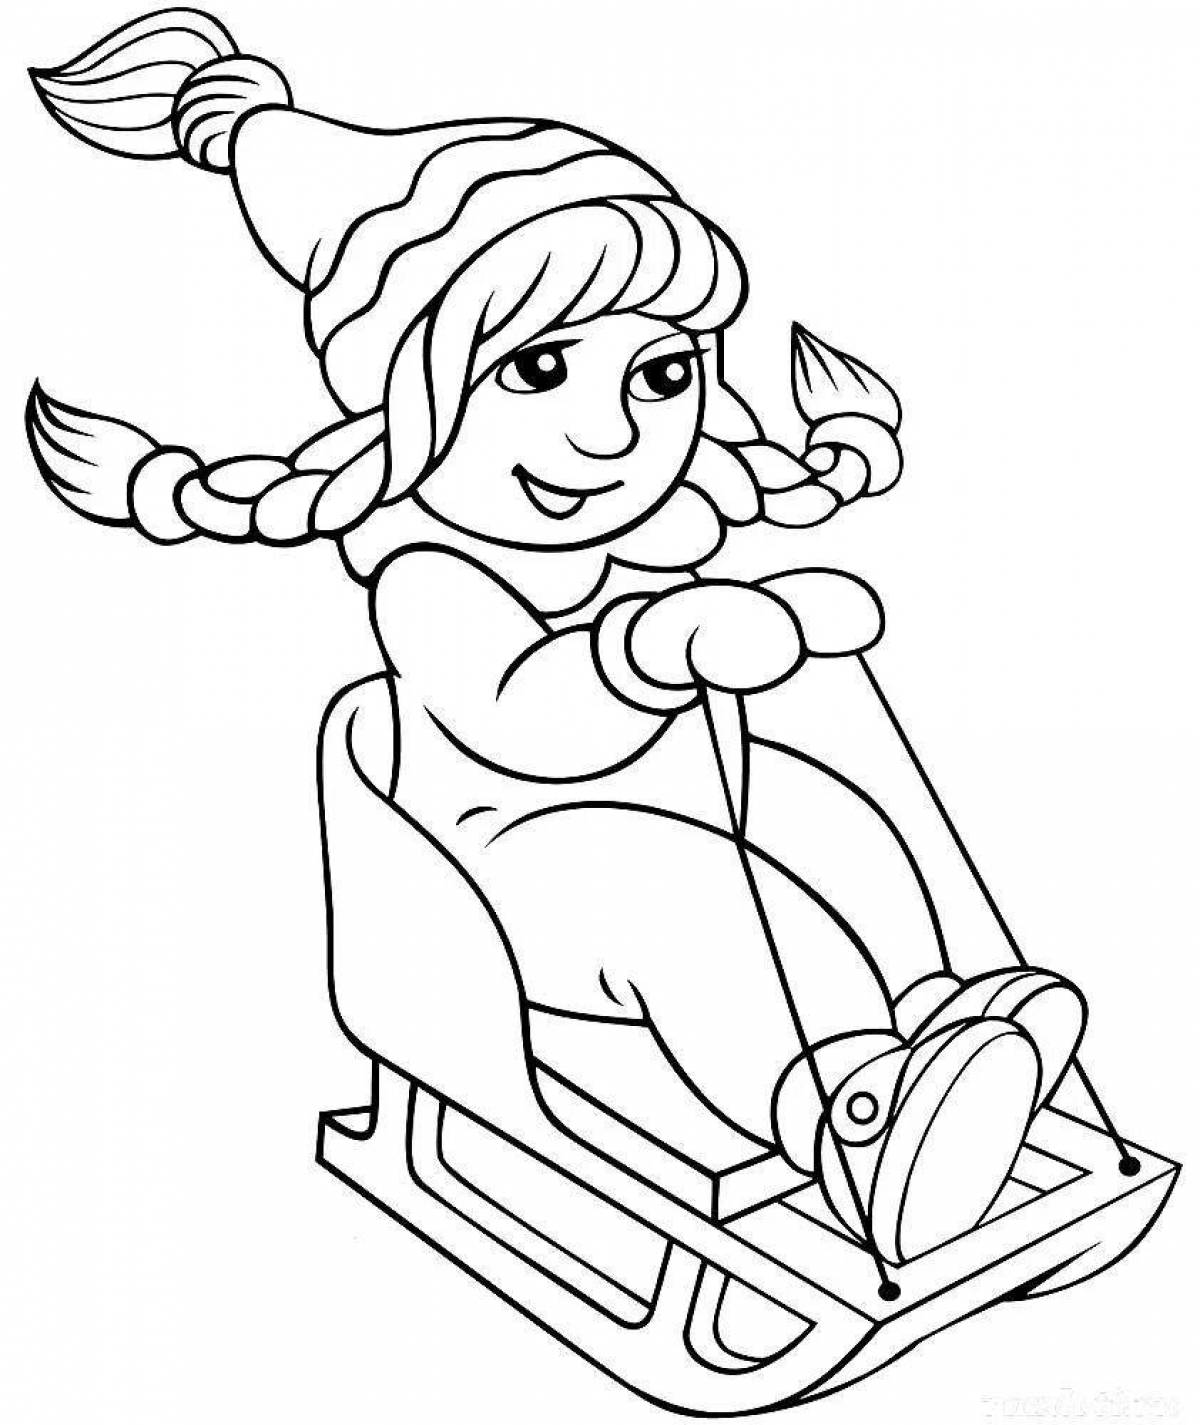 An enthusiastic child on a sleigh coloring book